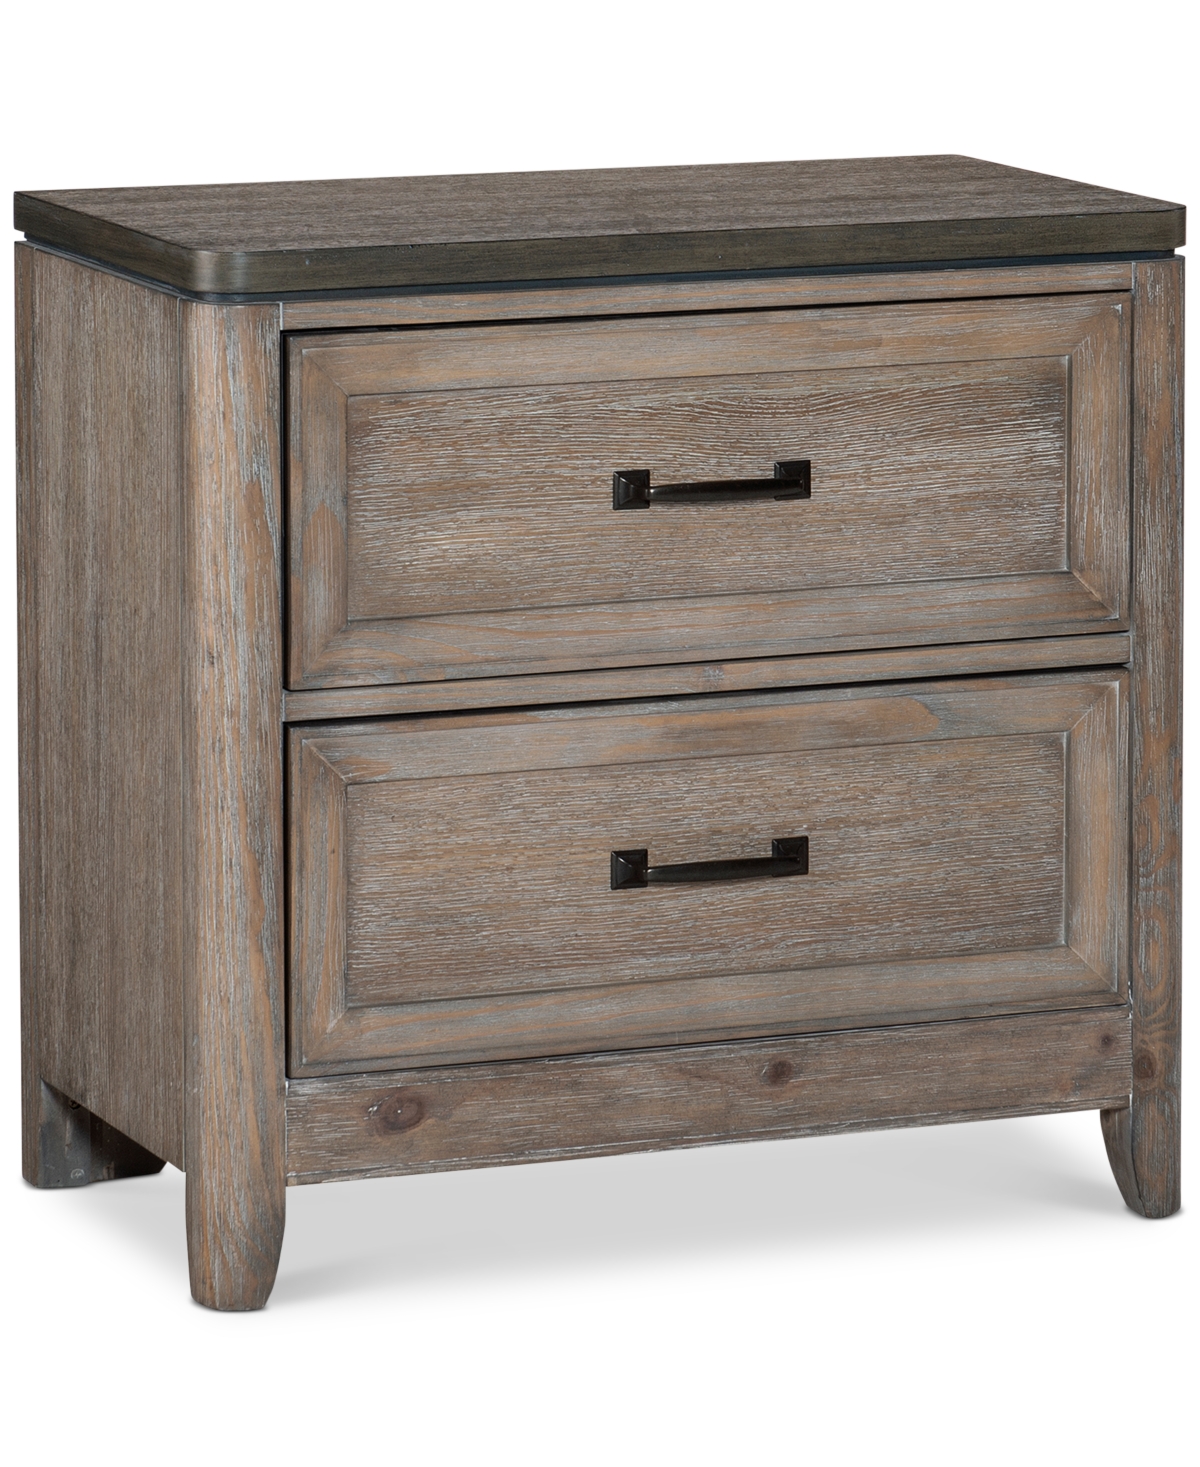 Homelegance Aveline Nightstand With Power Outlets In Multi